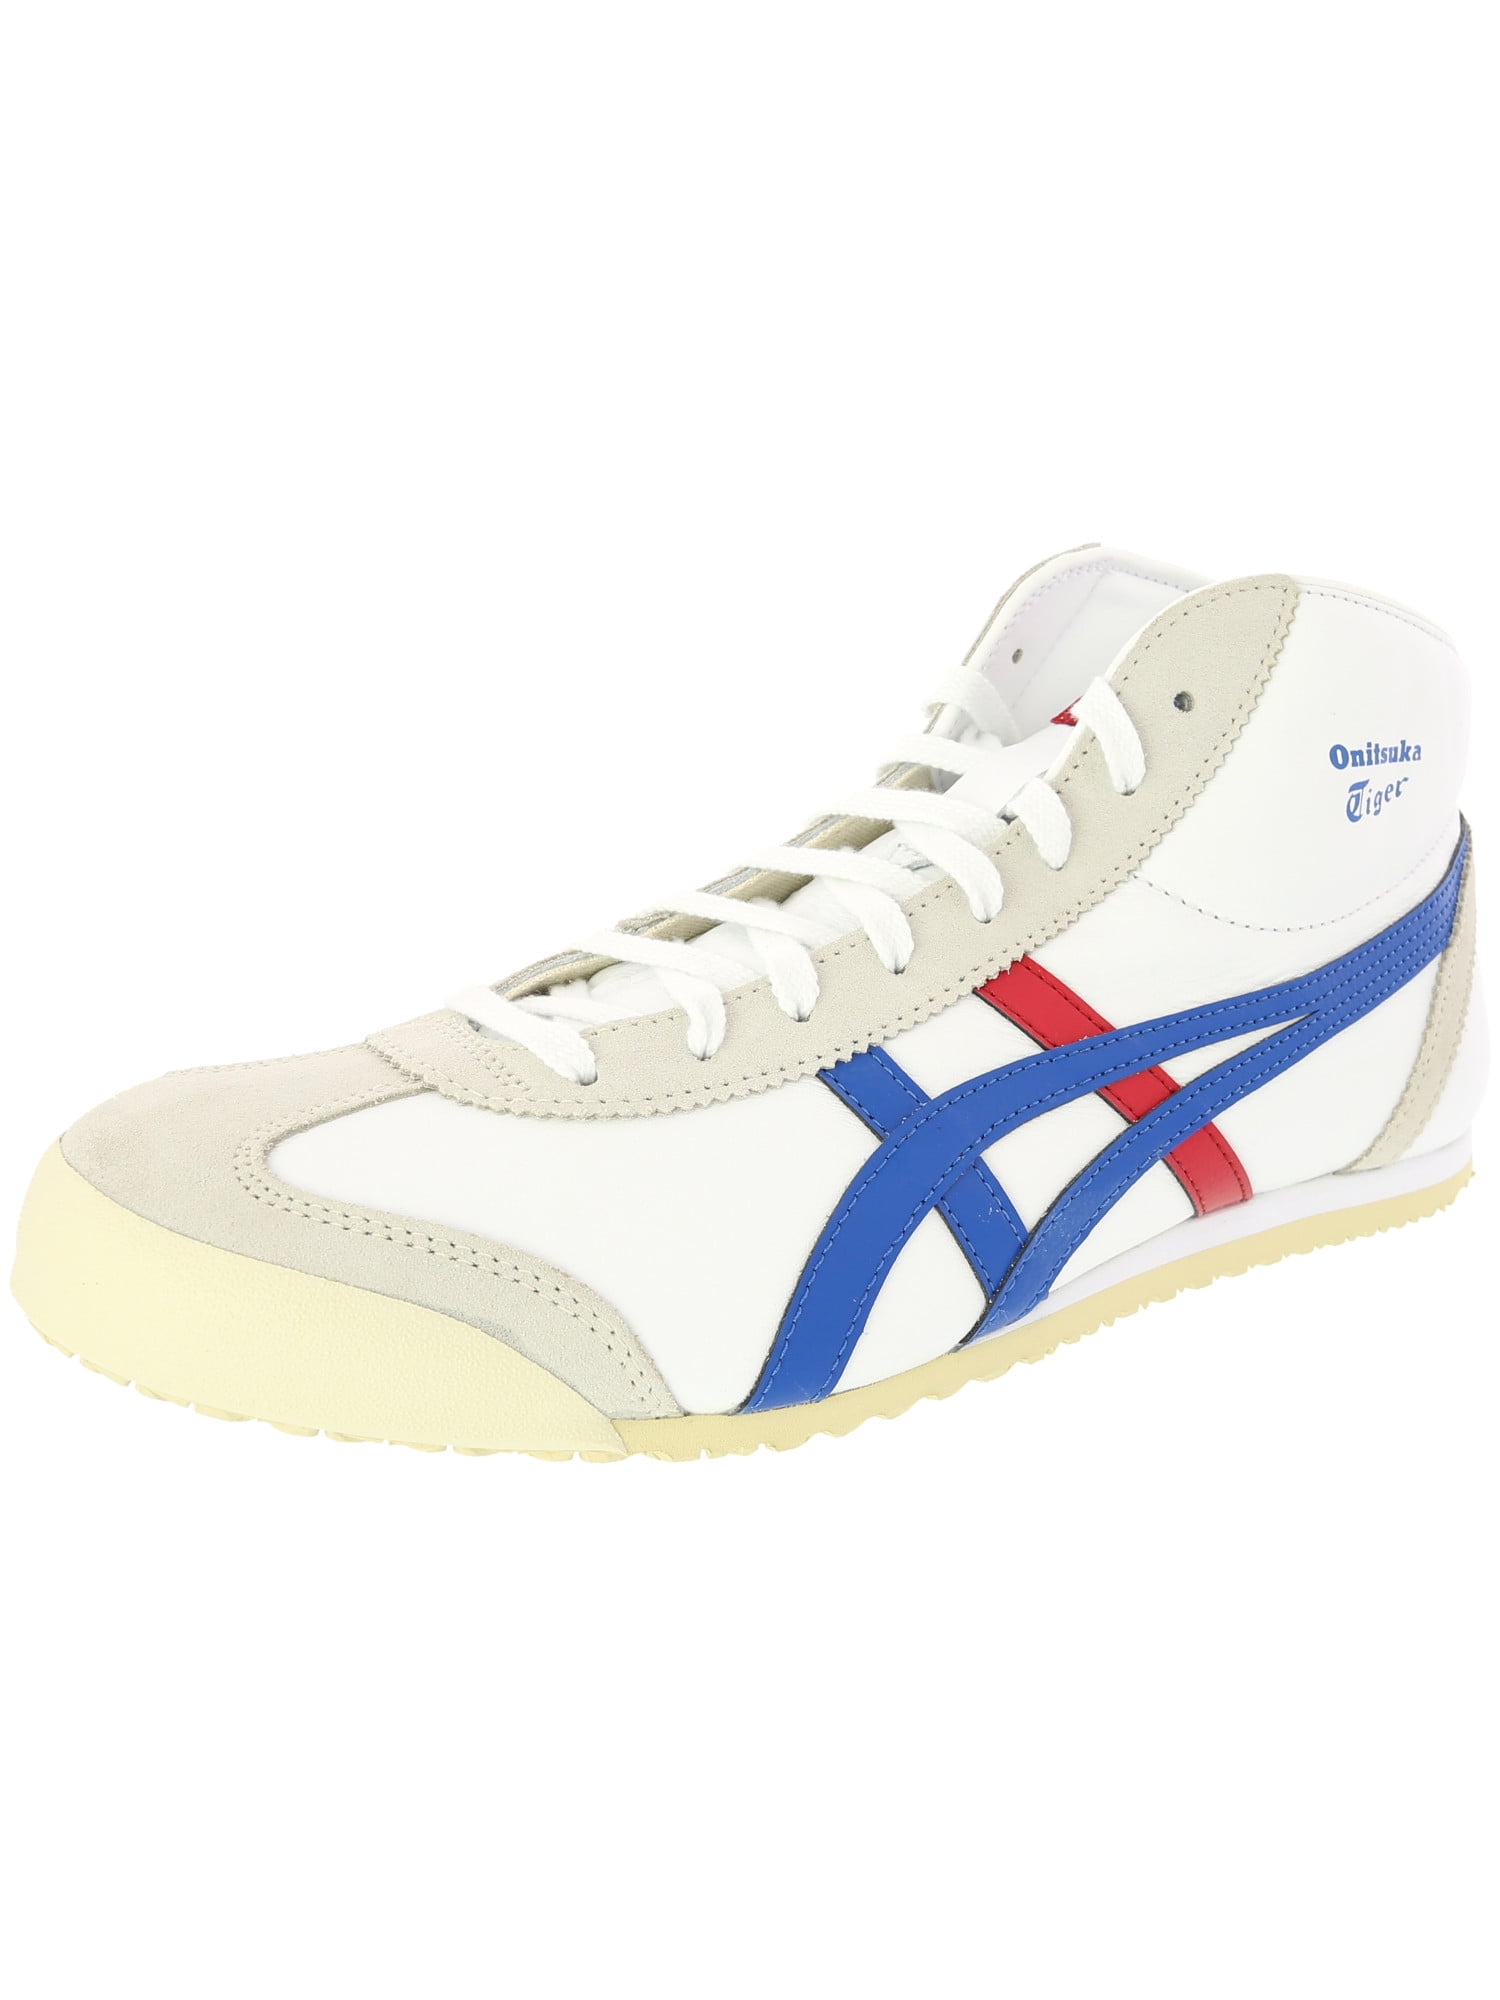 onitsuka tiger mexico mid runner deluxe